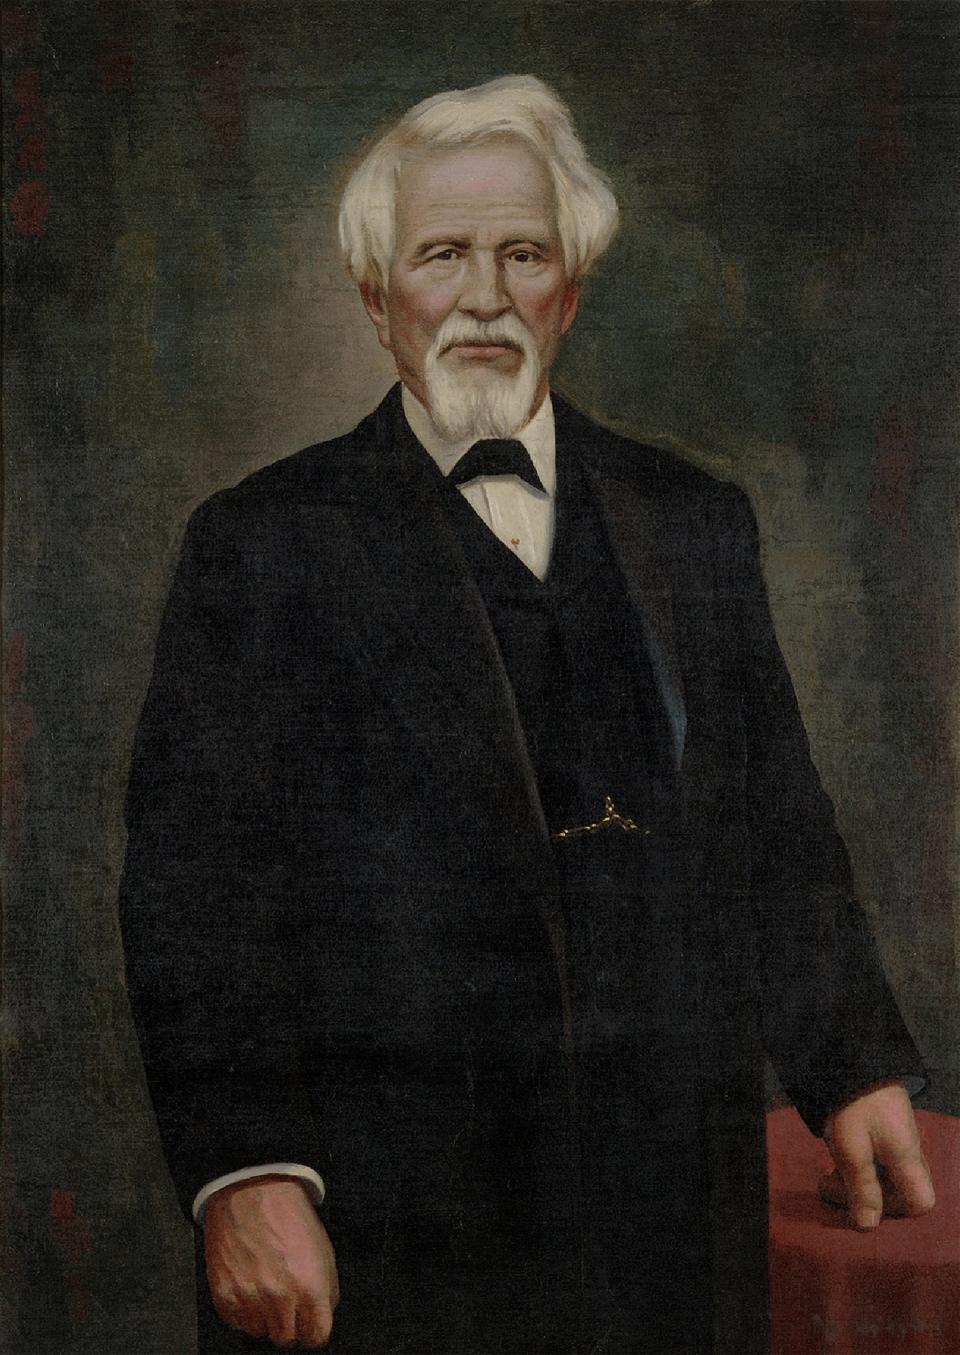 Joseph Gaut (Attributed) John Milsome Jury (c.1880) oil on canvas Collection of Aratoi Wairarapa Museum of Art and History. On loan from the Jury family.